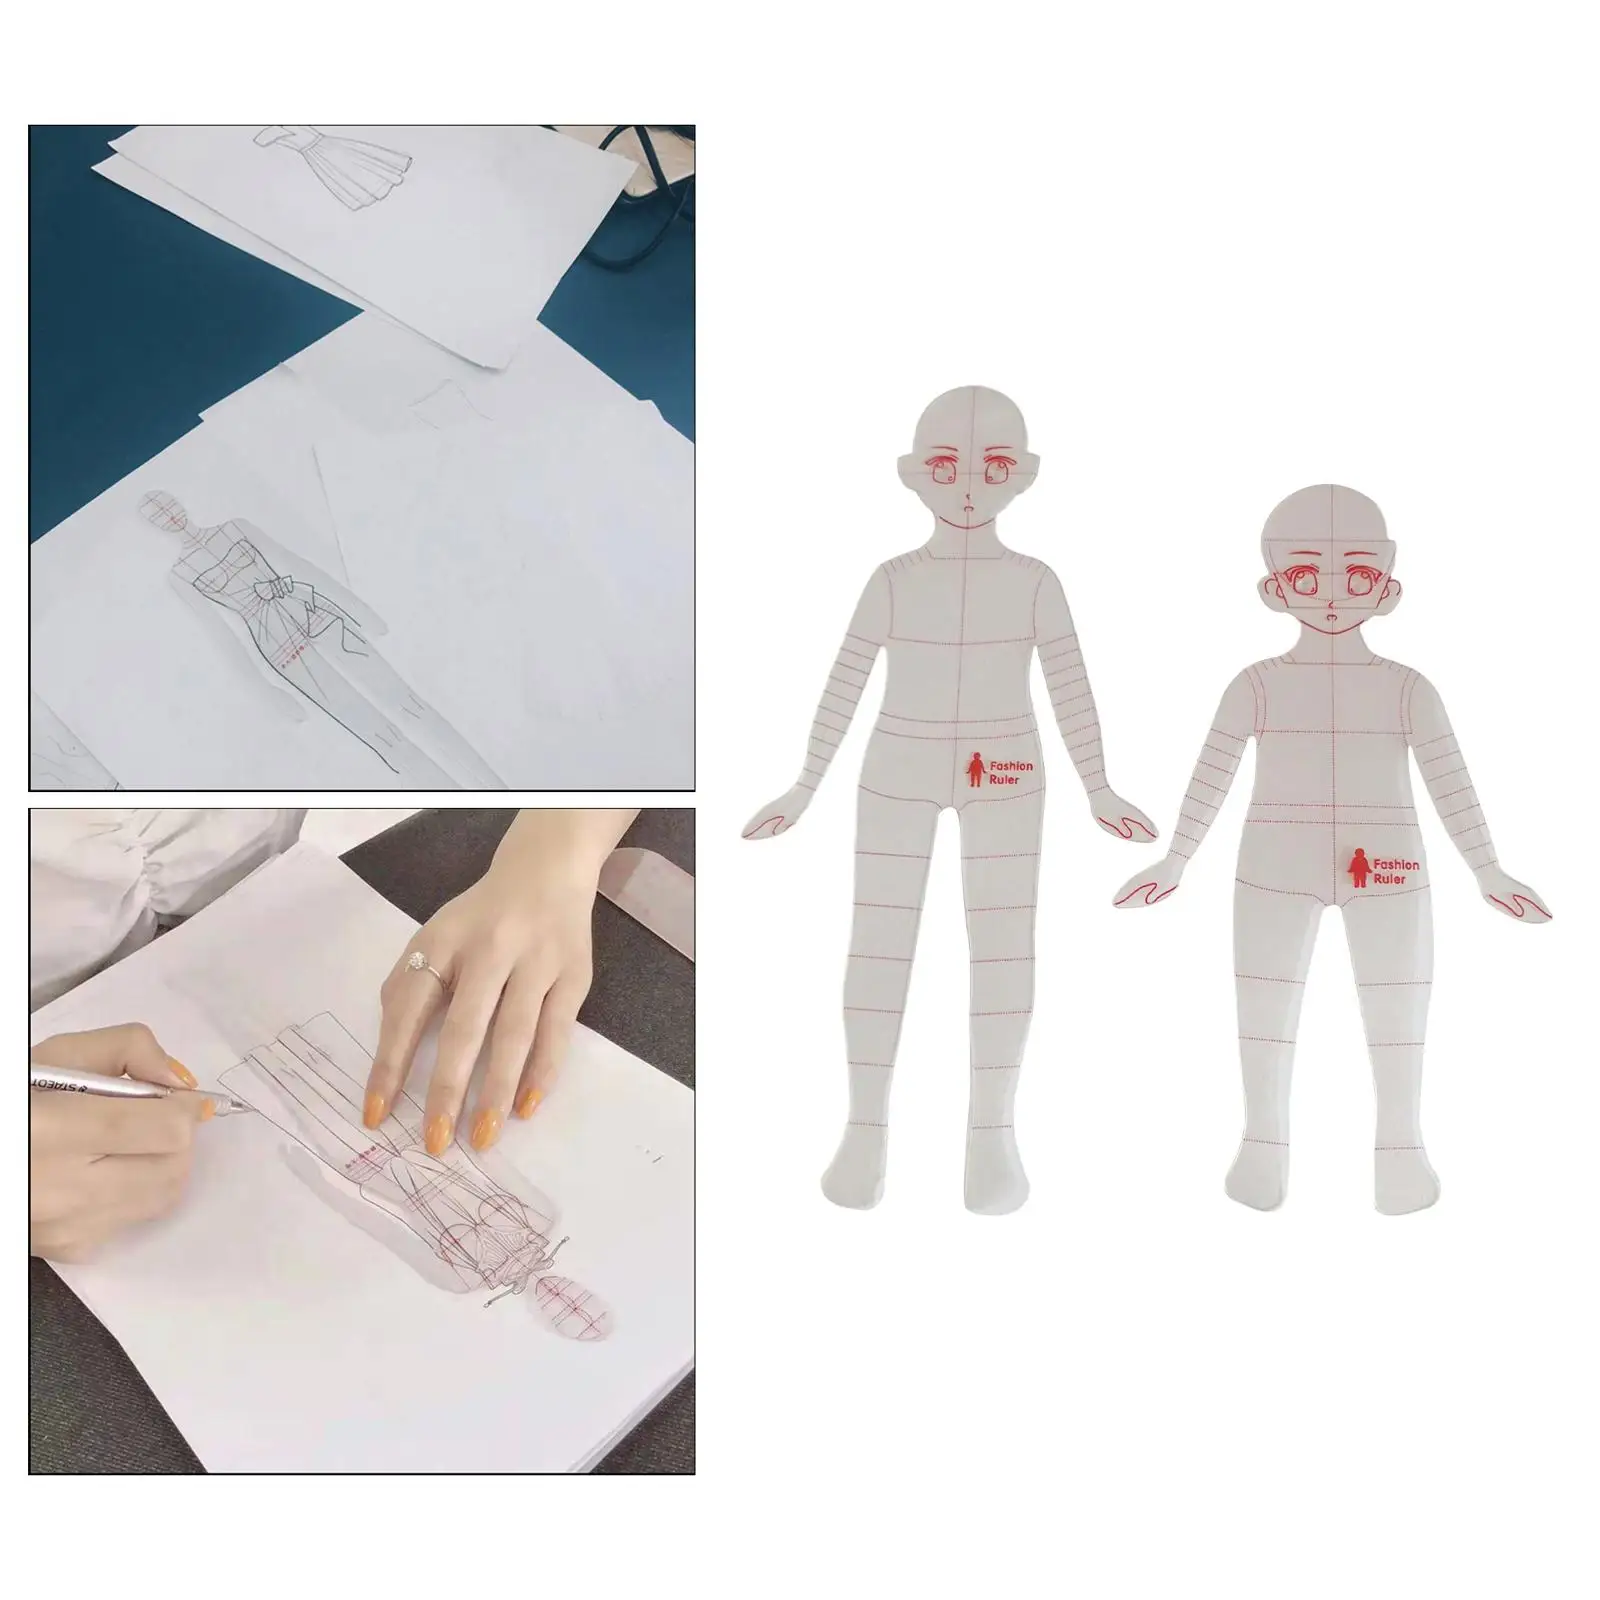 2 Pieces Template Ruler Pattern Makers Tailors Clear Tailoring Durable Clothing Making Portable Sewing Humanoid Patterns Design